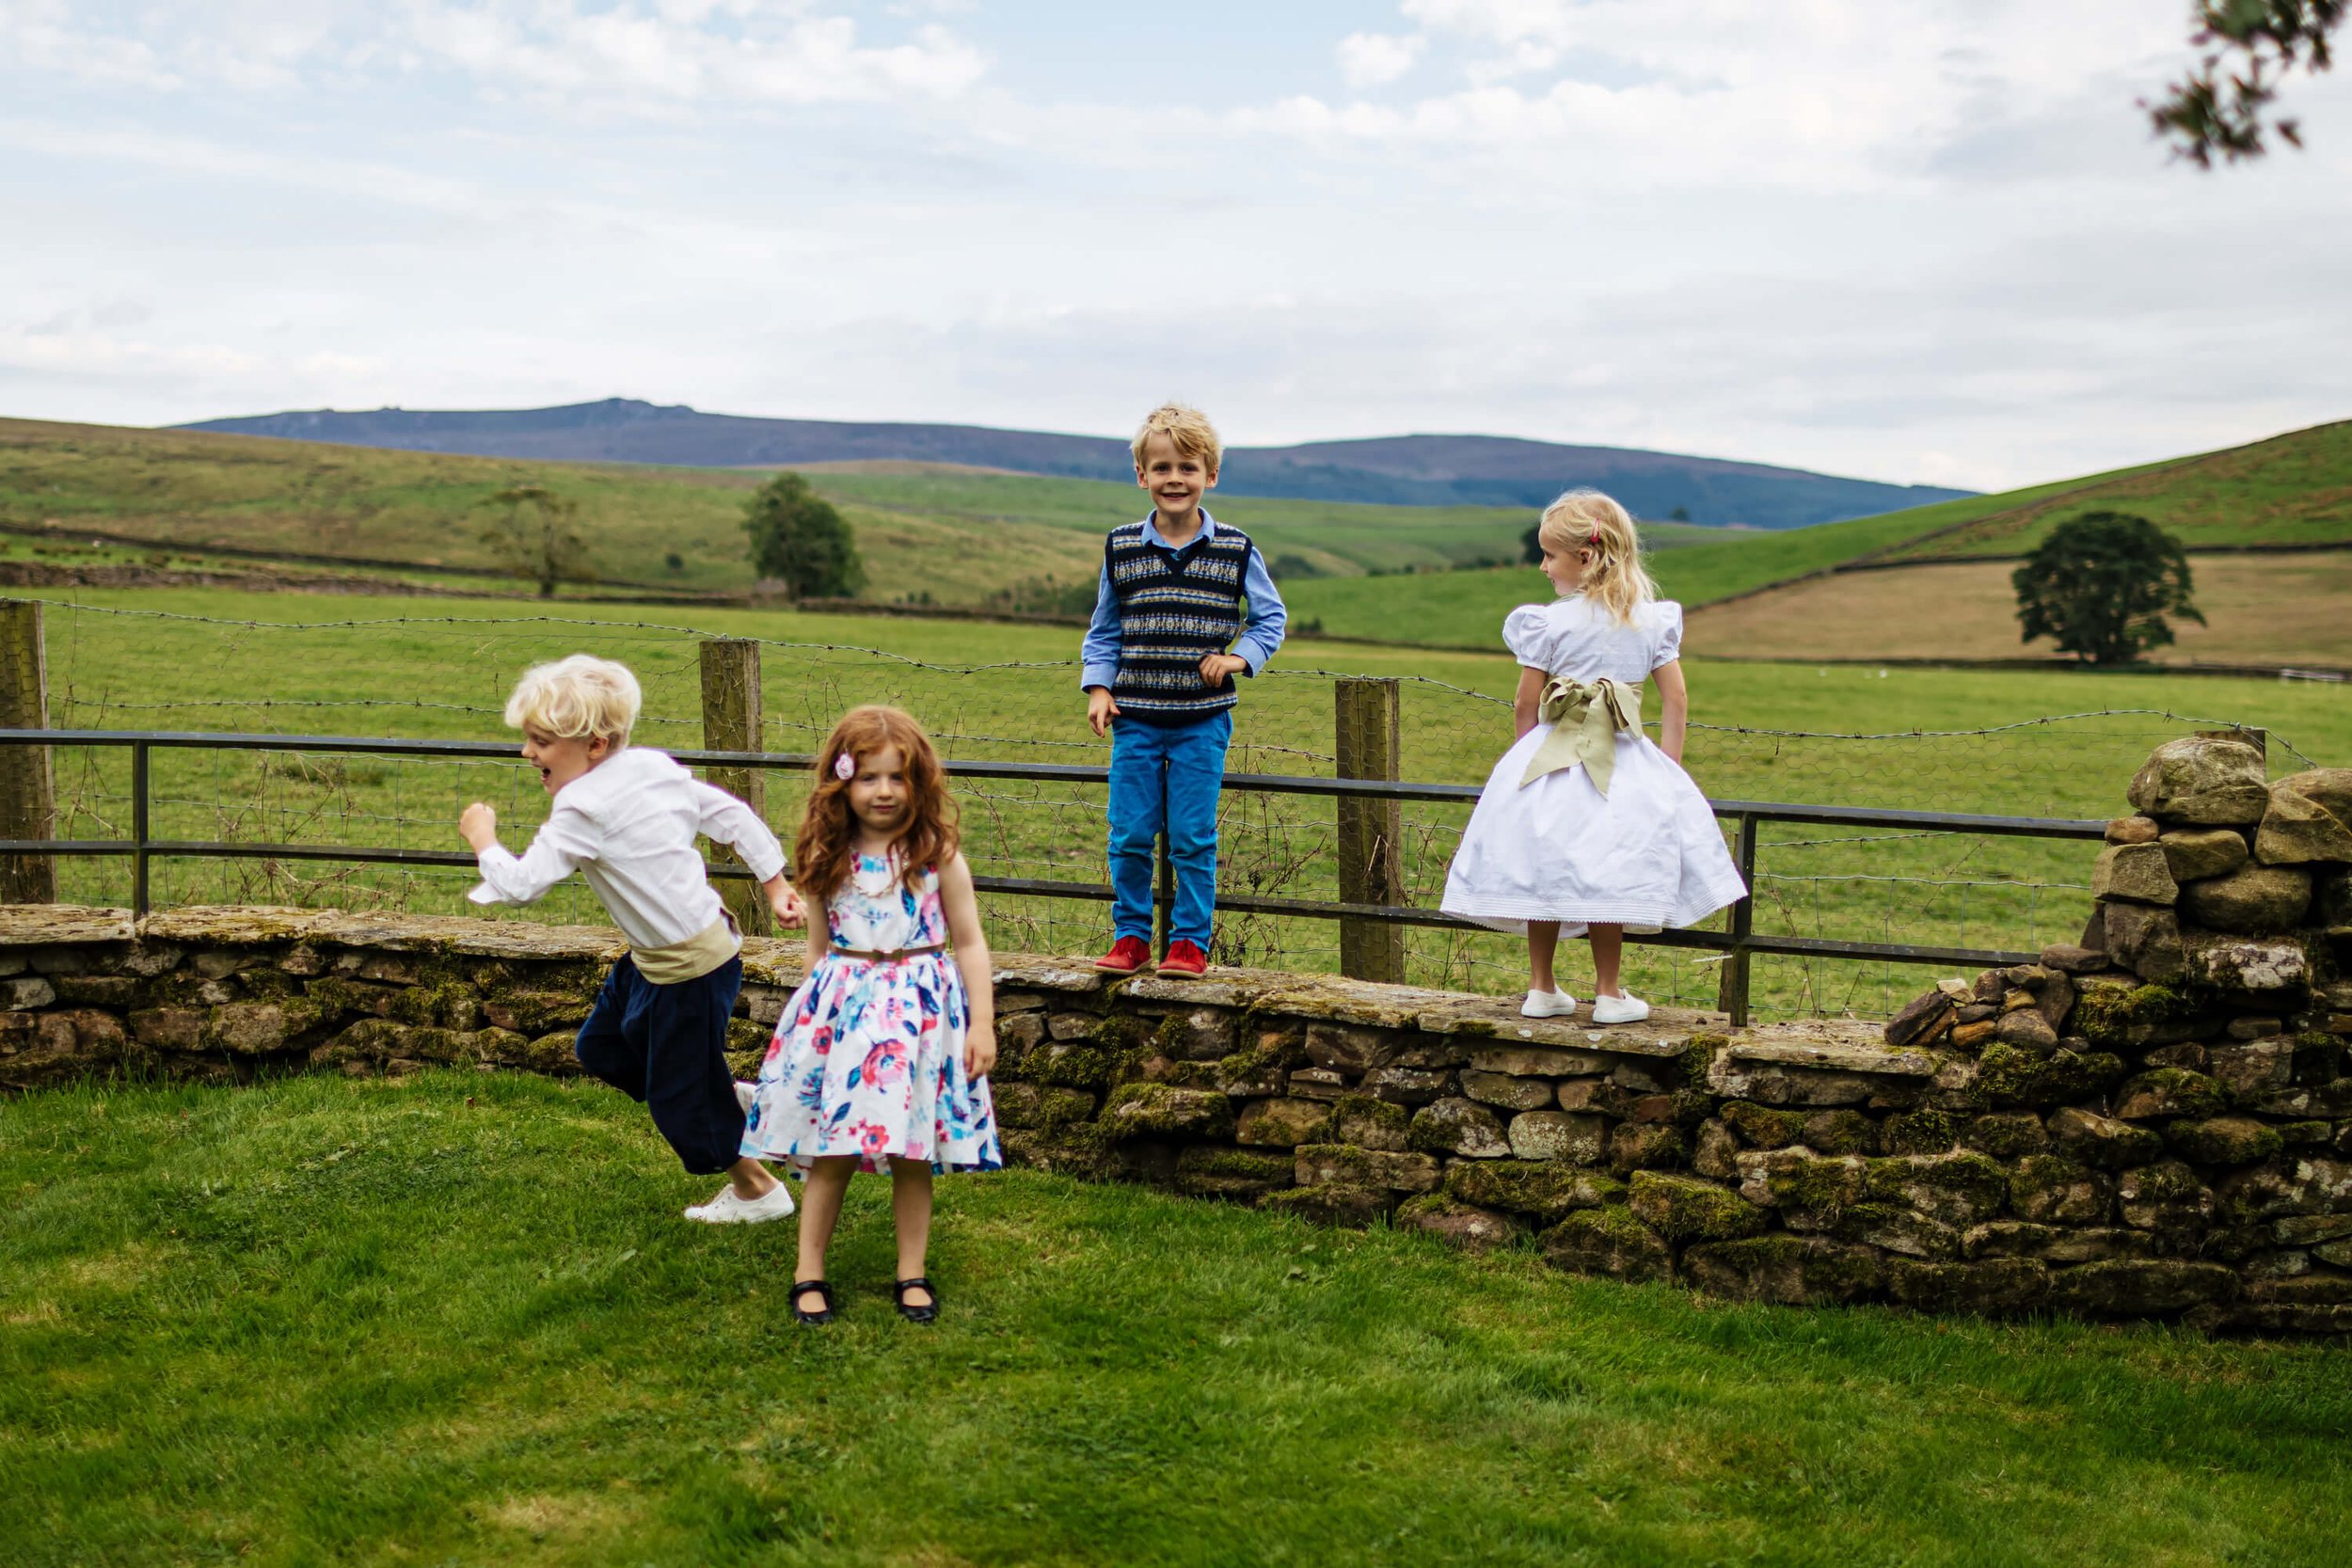 Kids at a wedding in Burnsall